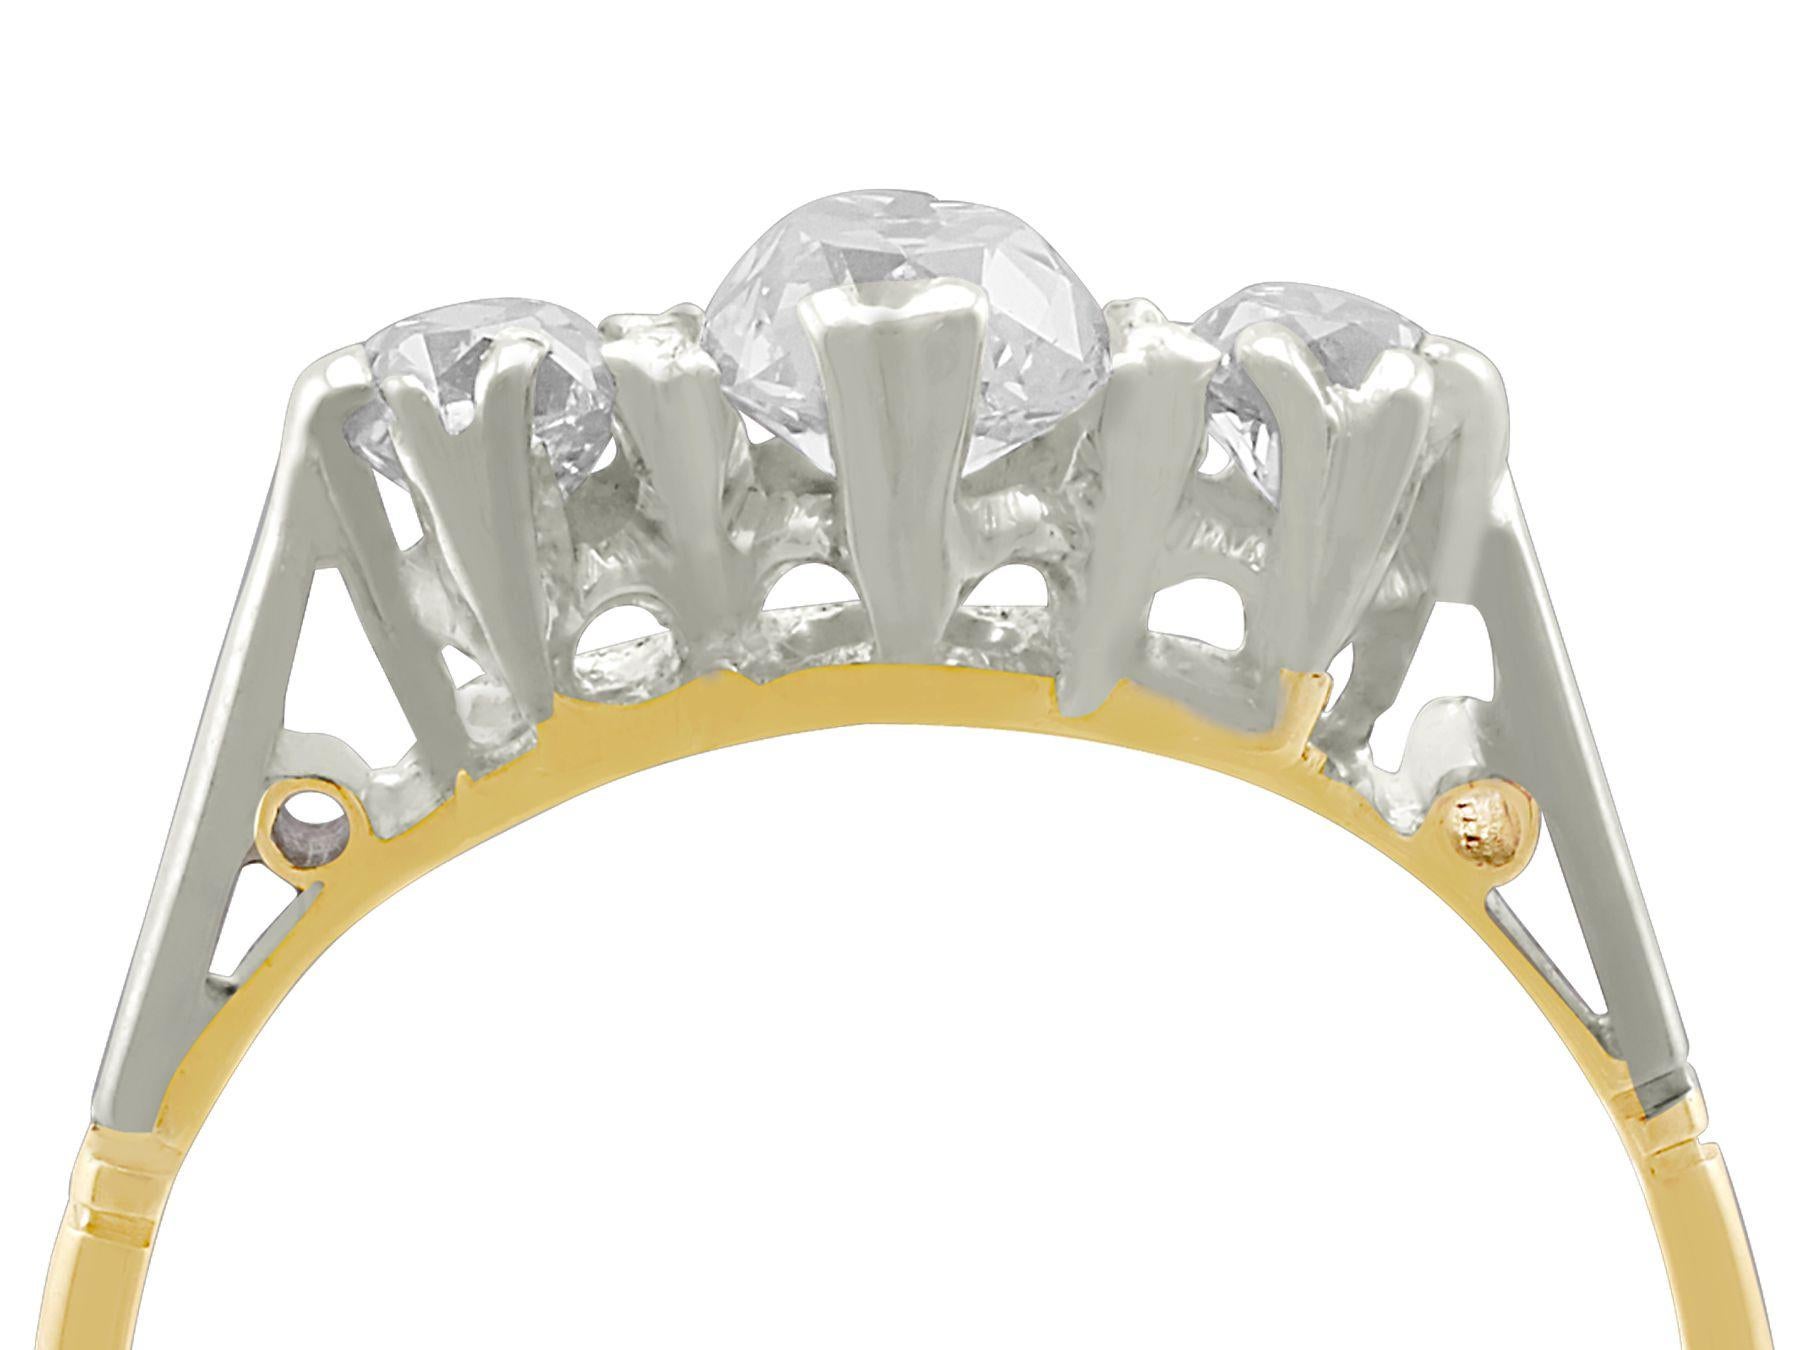 A fine and impressive antique 0.88 carat diamond and 18 karat yellow gold, platinum set trilogy ring; part of our diverse diamond jewelry and estate jewelry collections

This impressive antique diamond trilogy ring has been crafted in 18k yellow